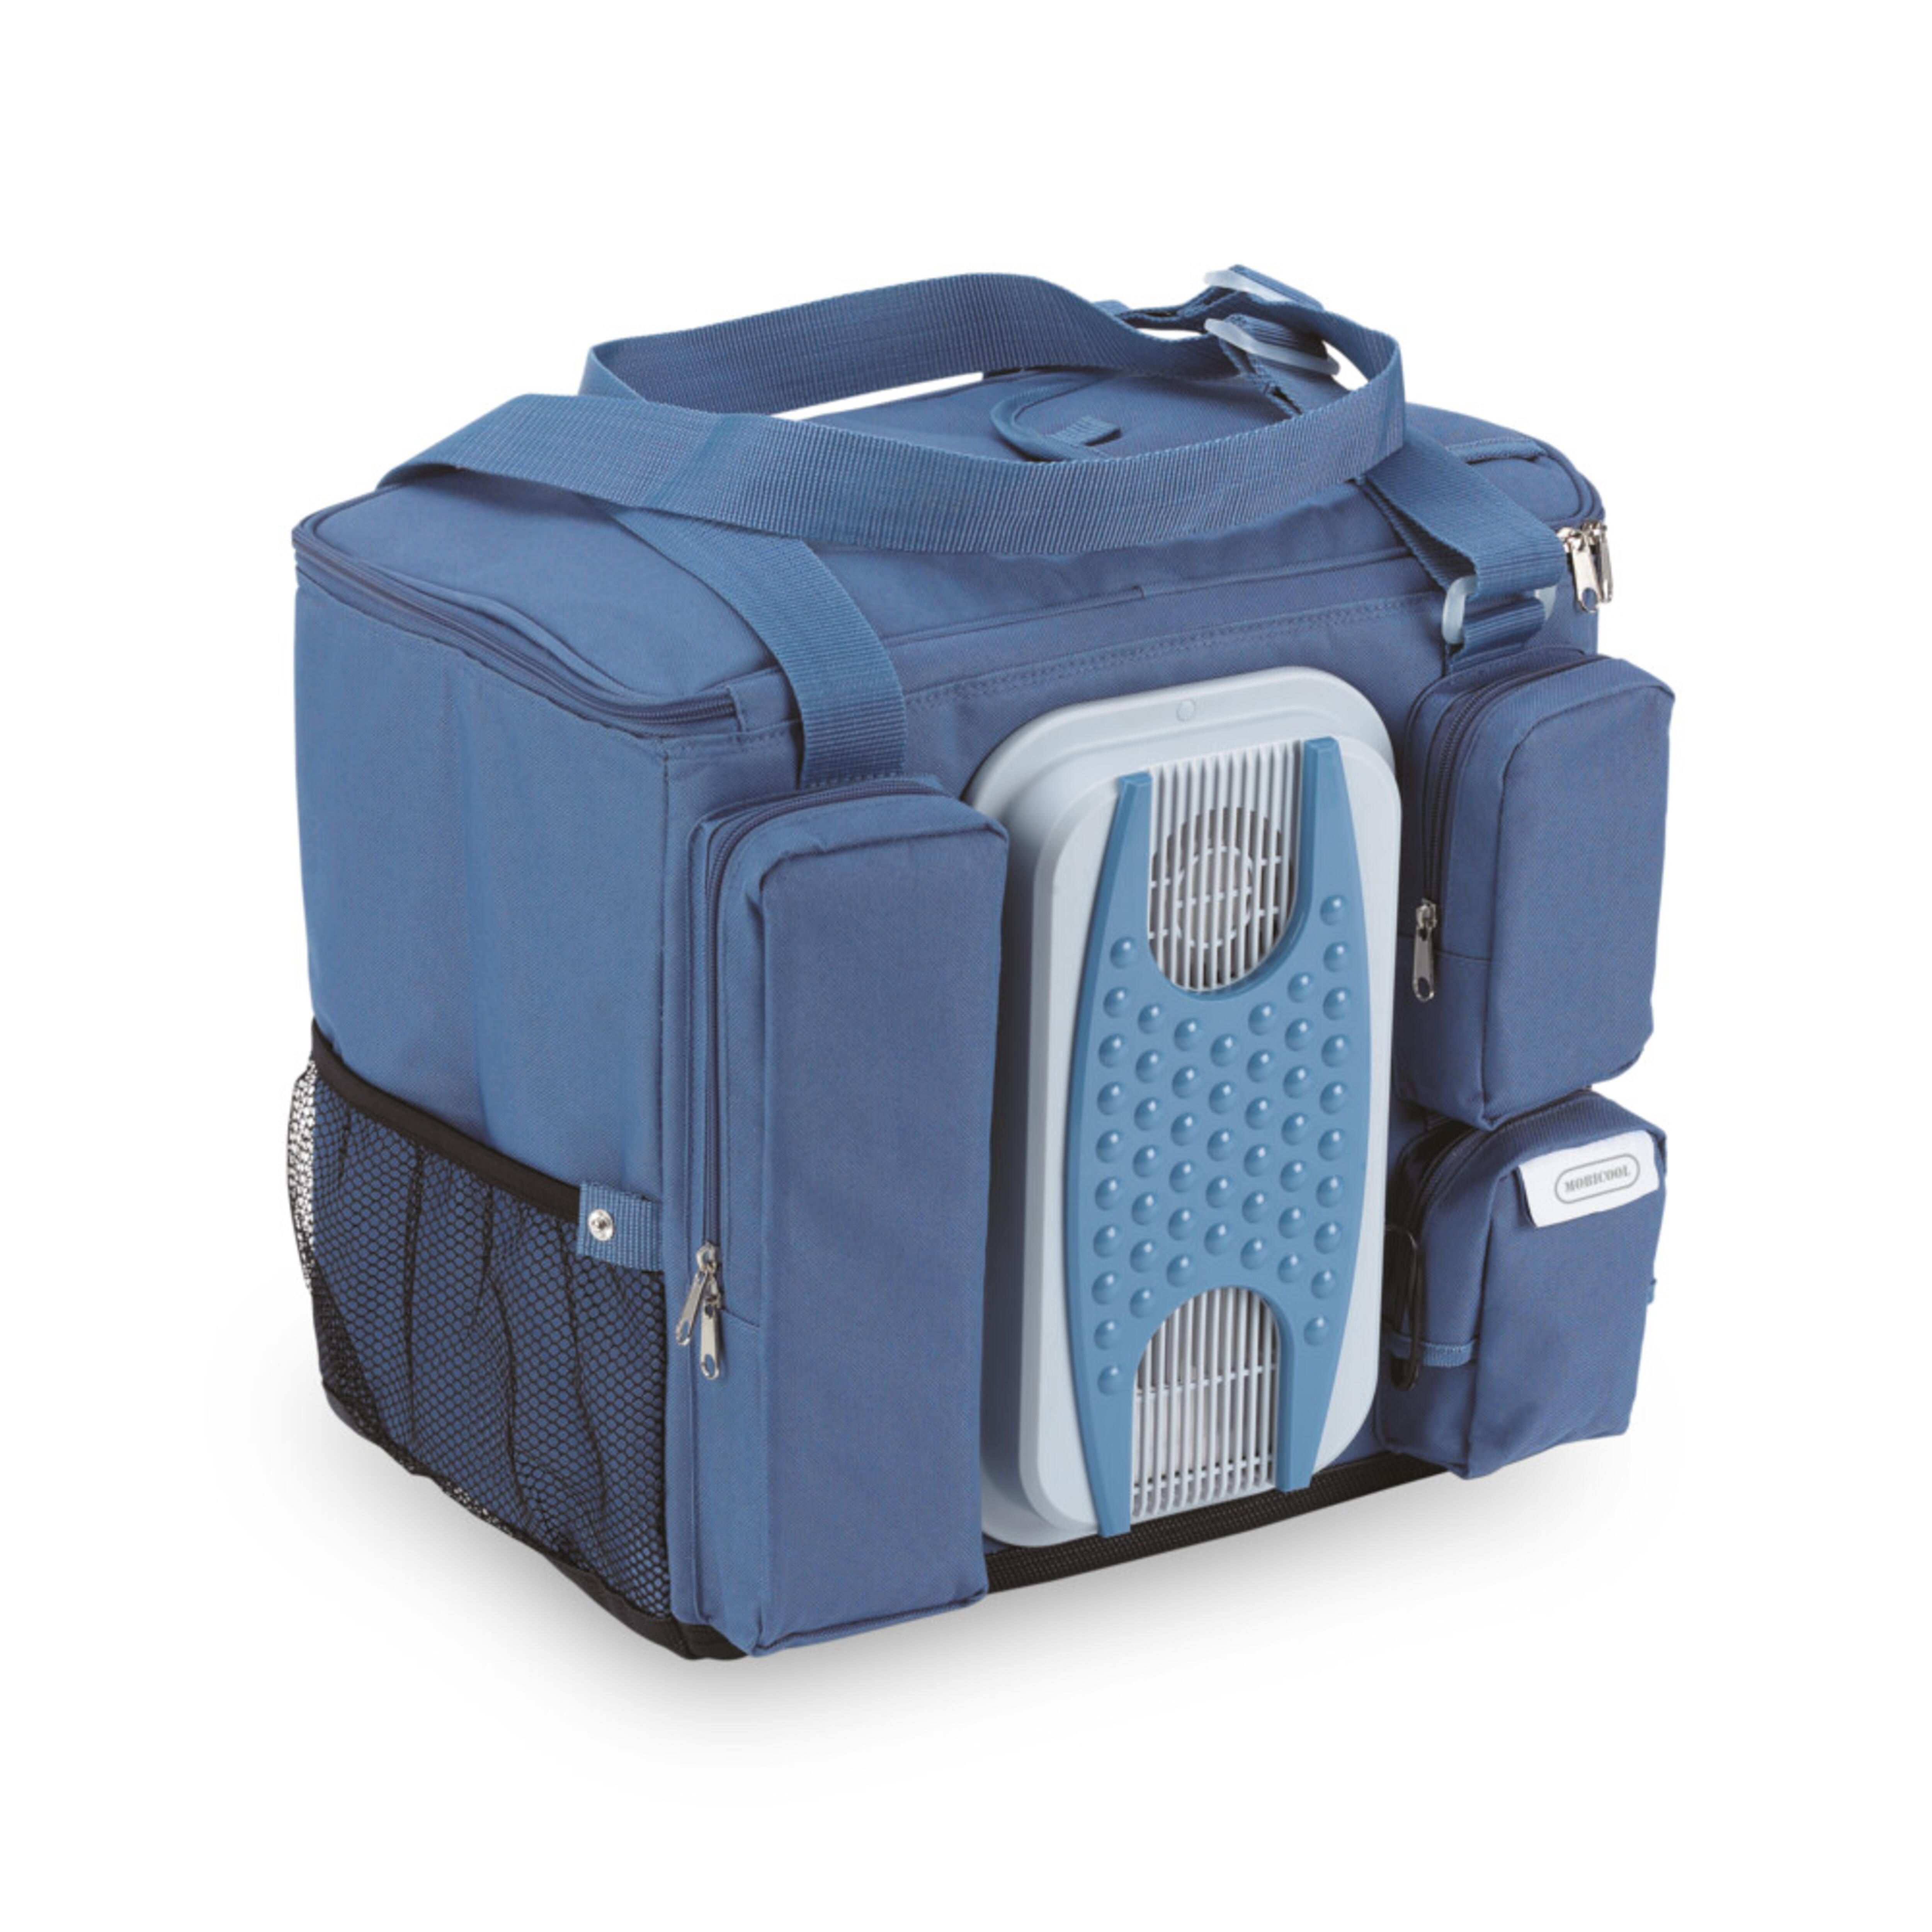 Mobicool Mb32 DC 12v Thermoelectric Cool Bag Blue 32l With Adjustable Straps for sale online 